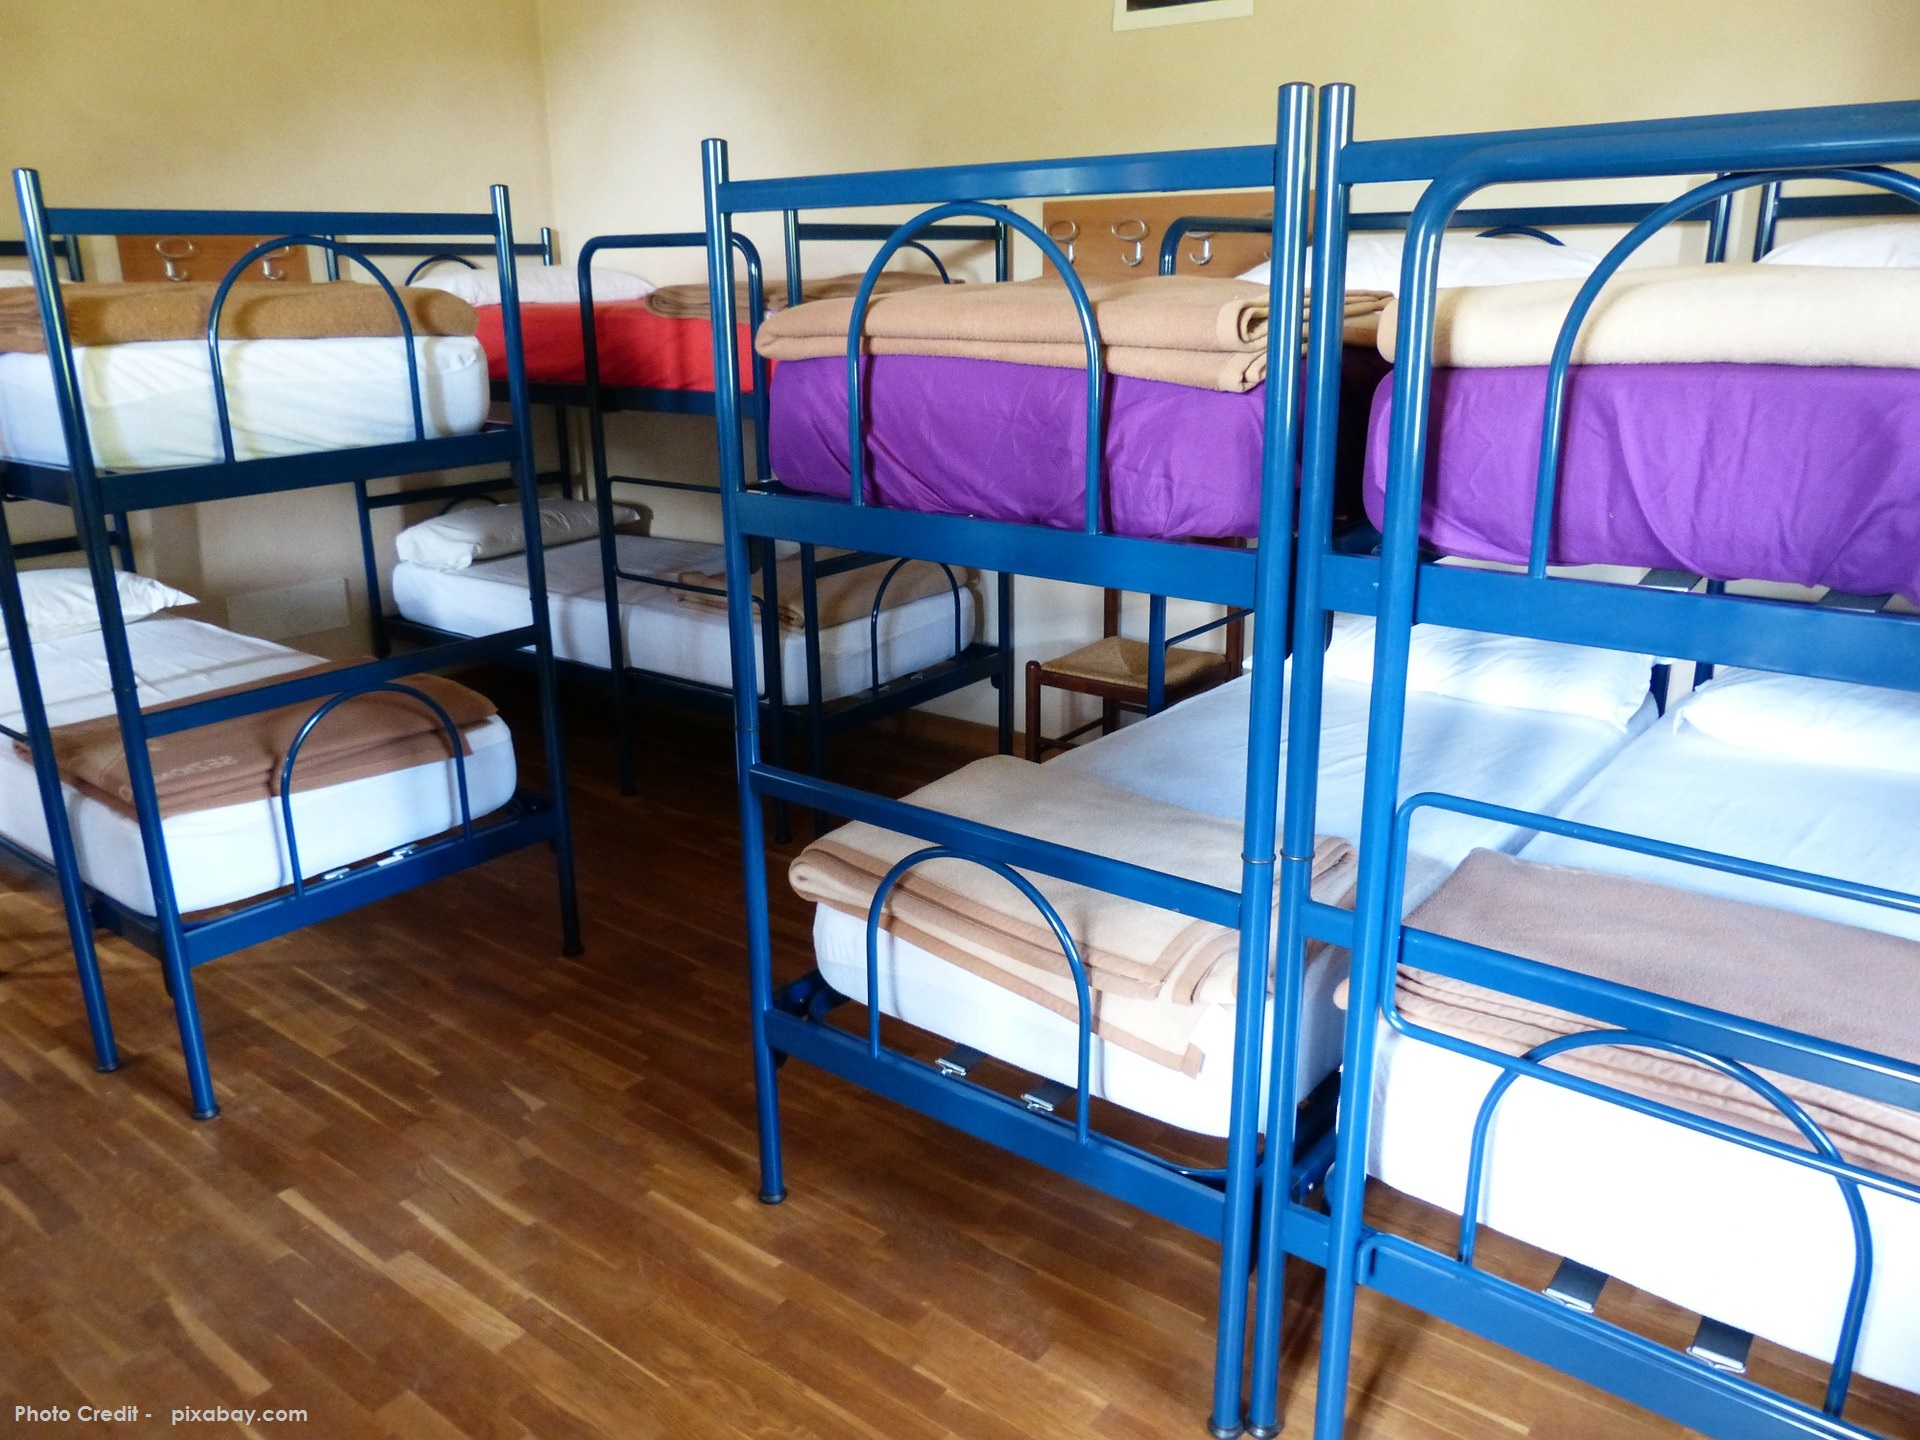 One of the Boys' Hostel Rooms.